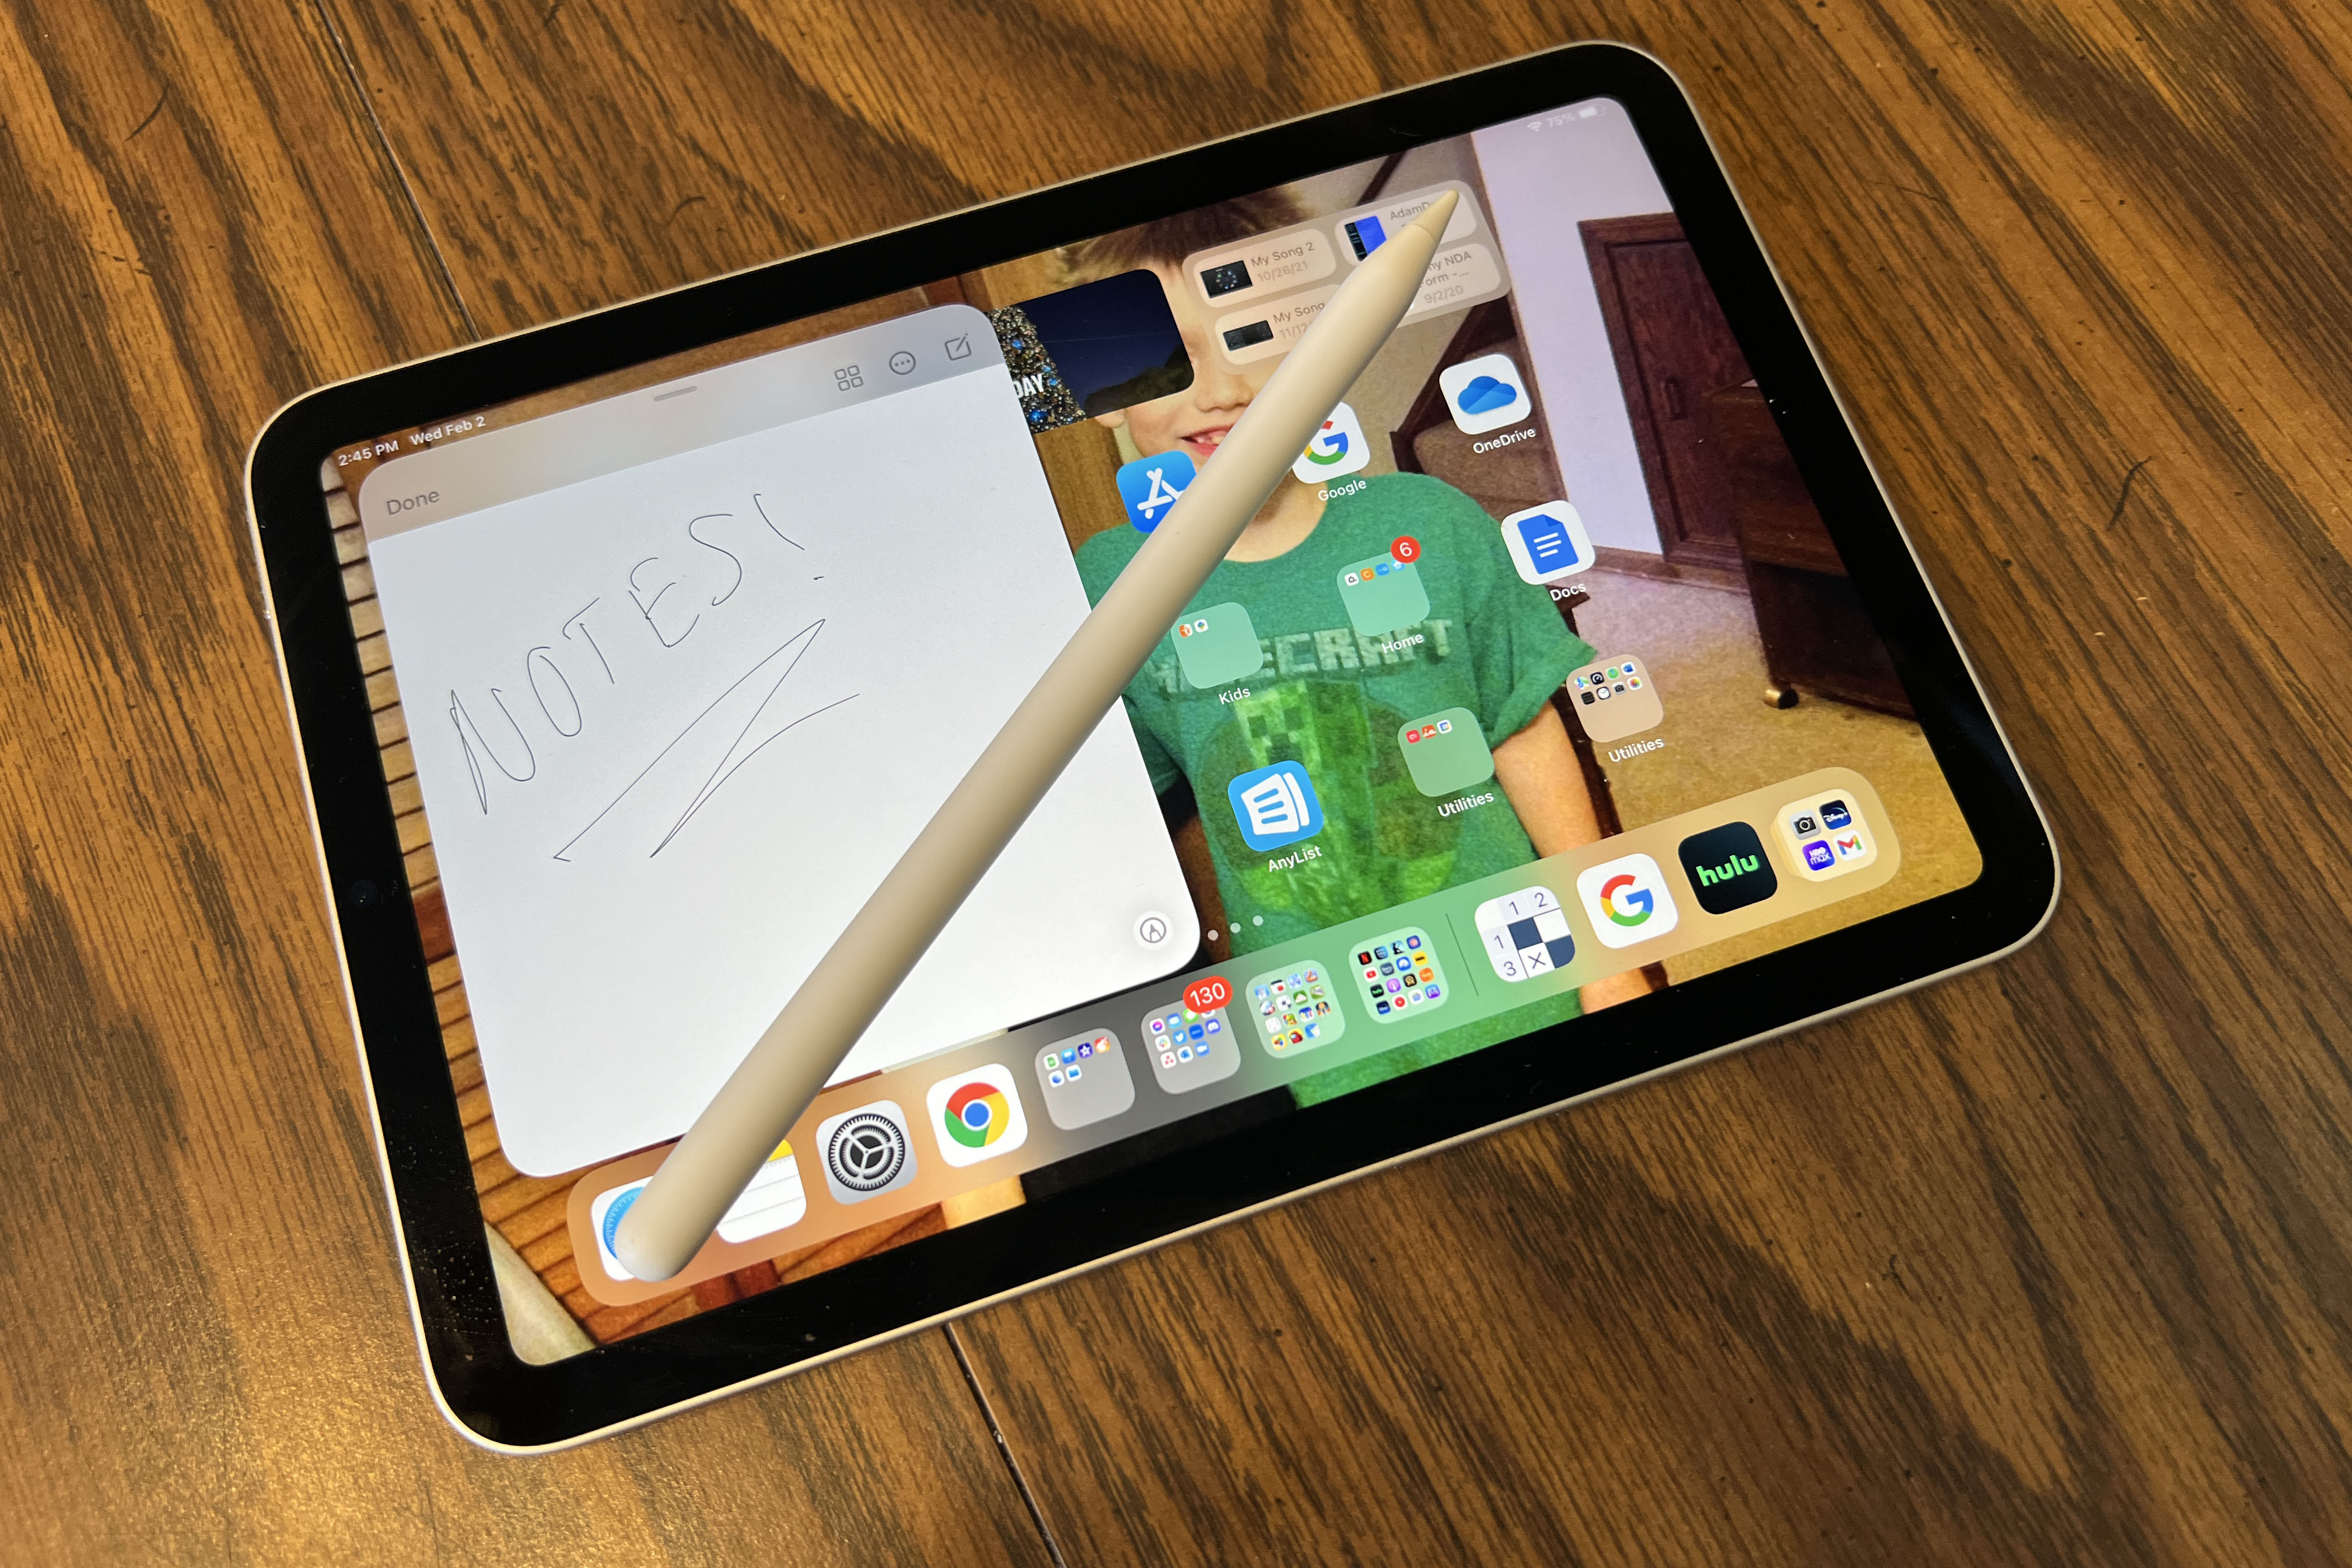 All-new iPad Mini announced with 5G, USB-C, and larger 8.3-inch